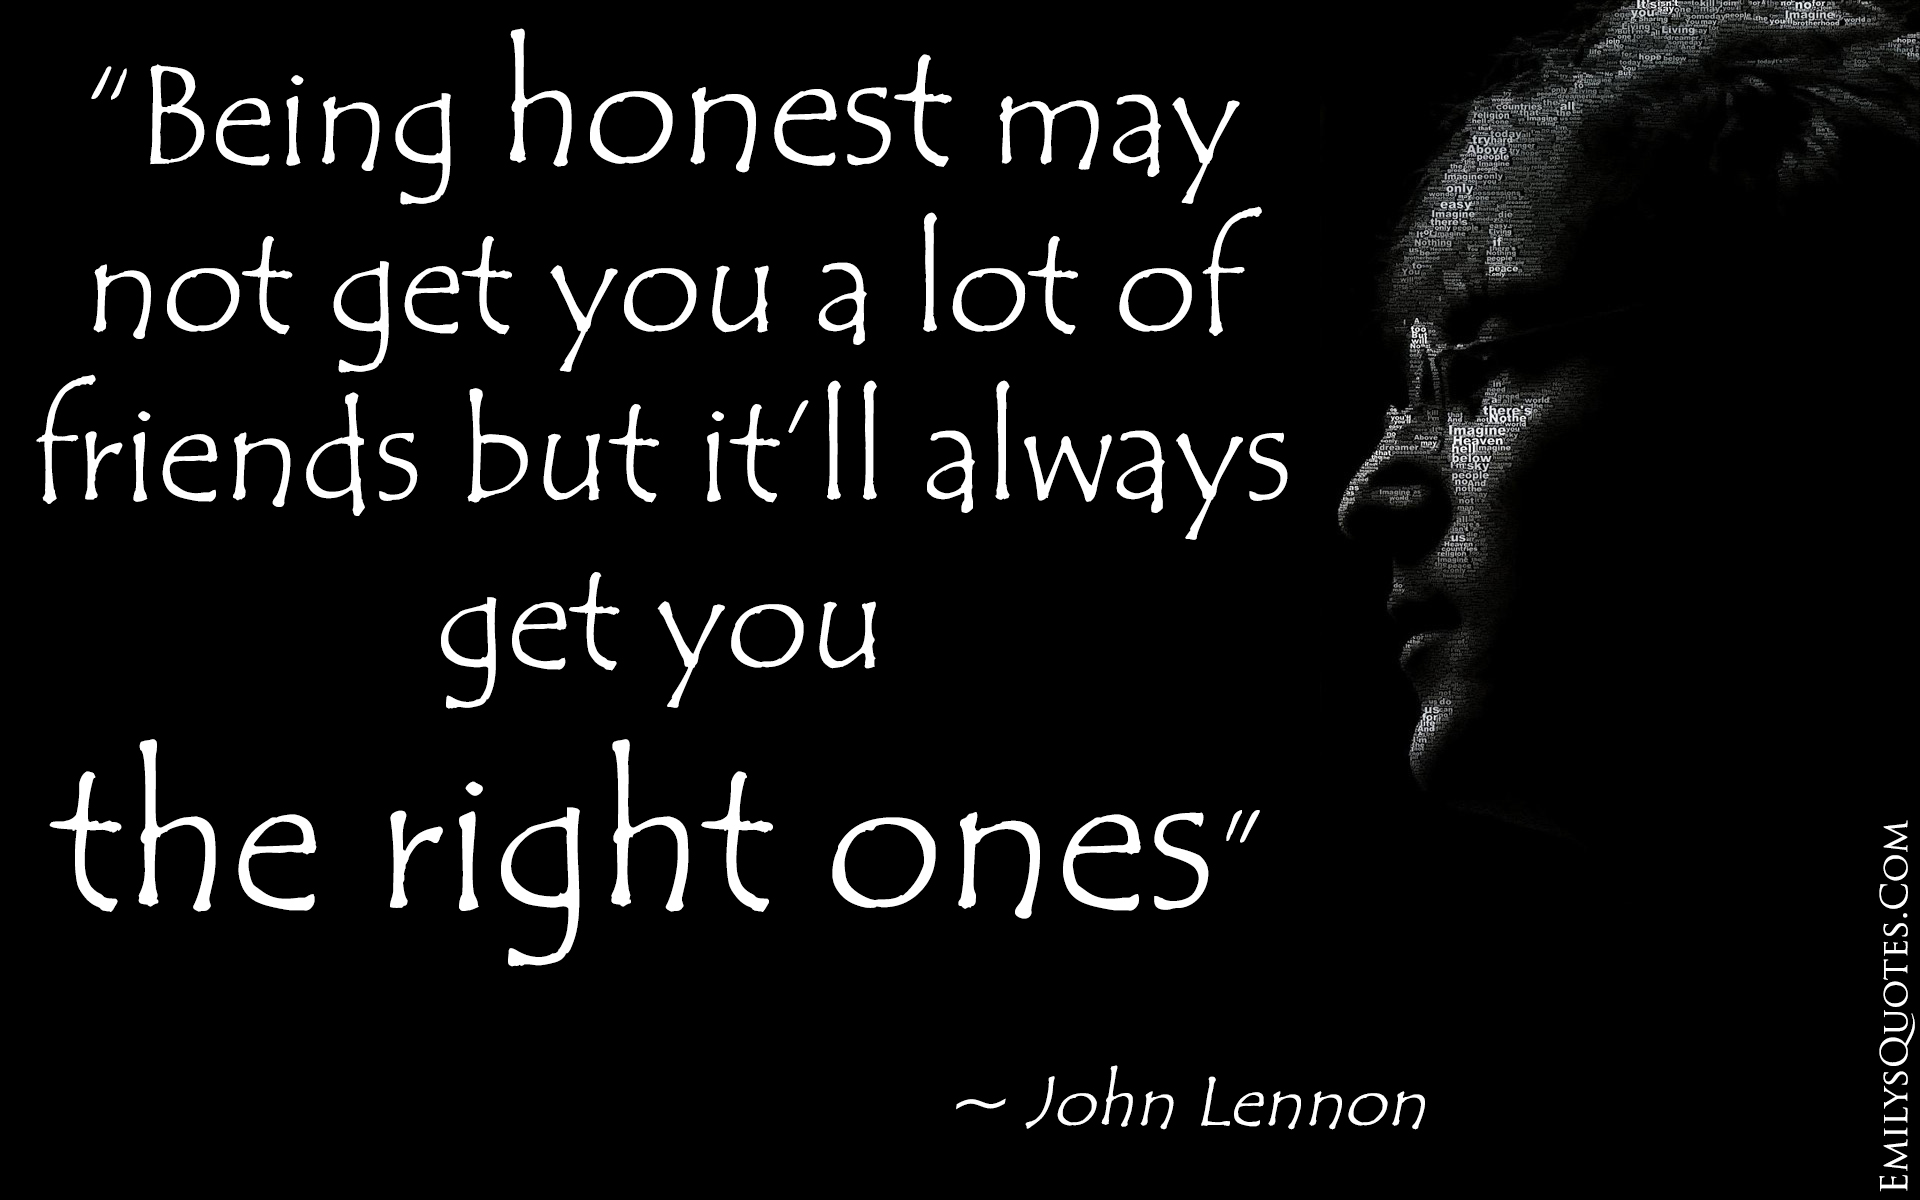 Being honest may not get you a lot of friends but it’ll always get you the right ones